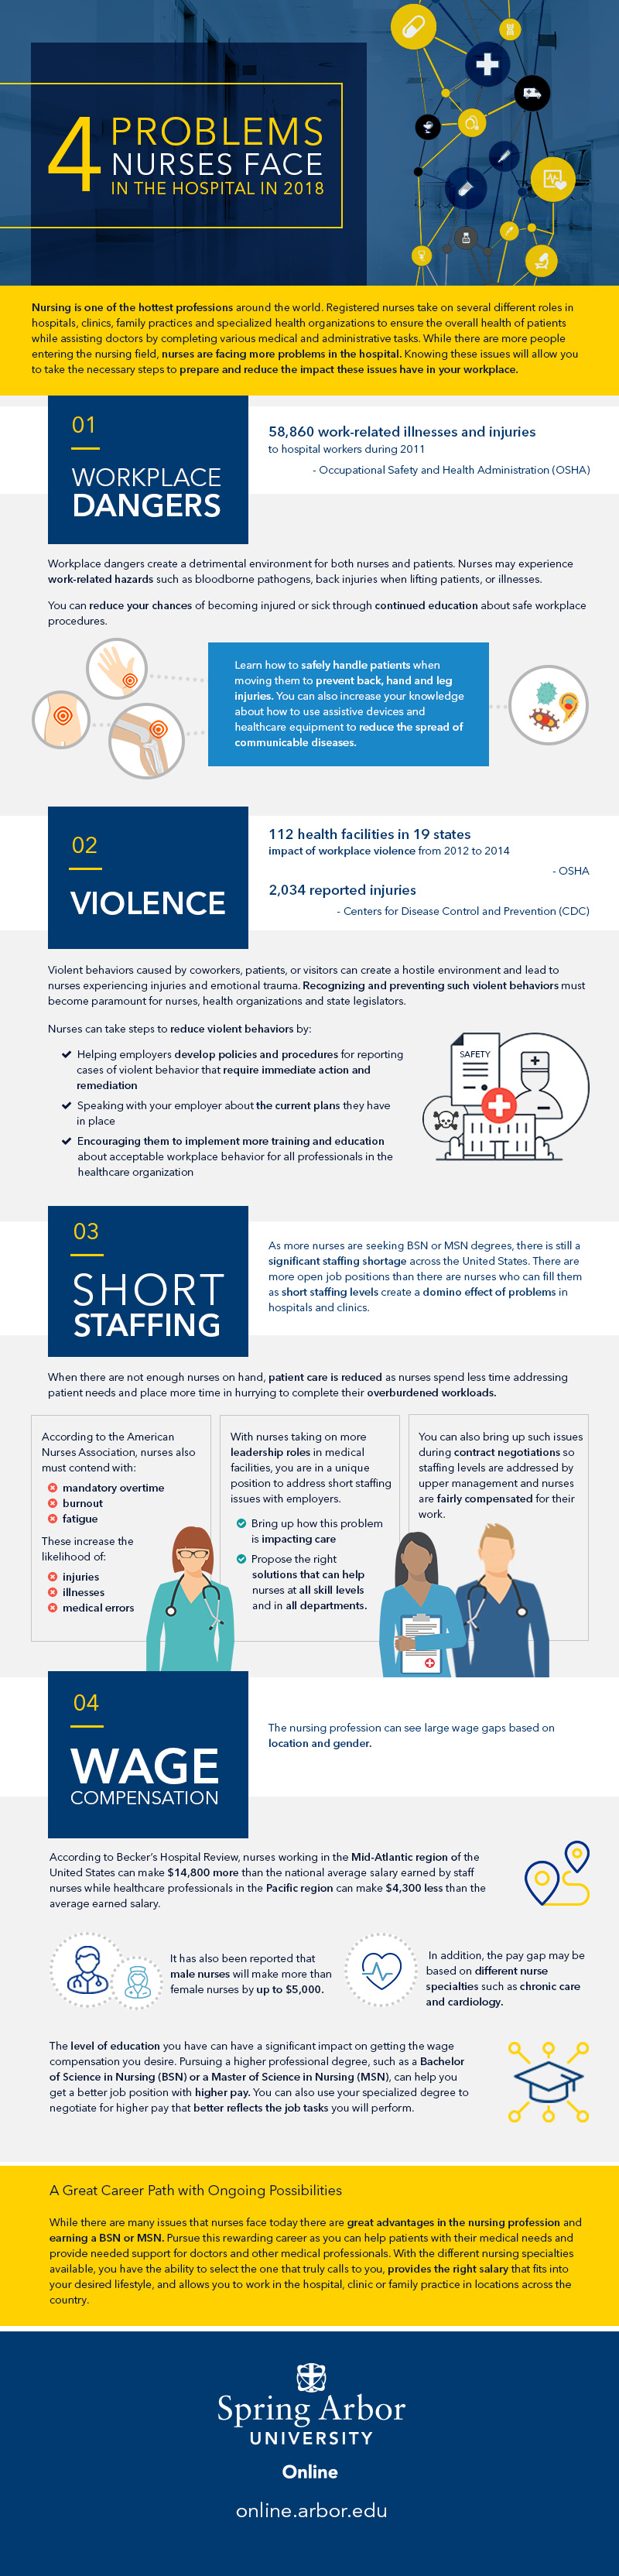 4 Problems Nurses Face in the Hospital in 2018 Infographic